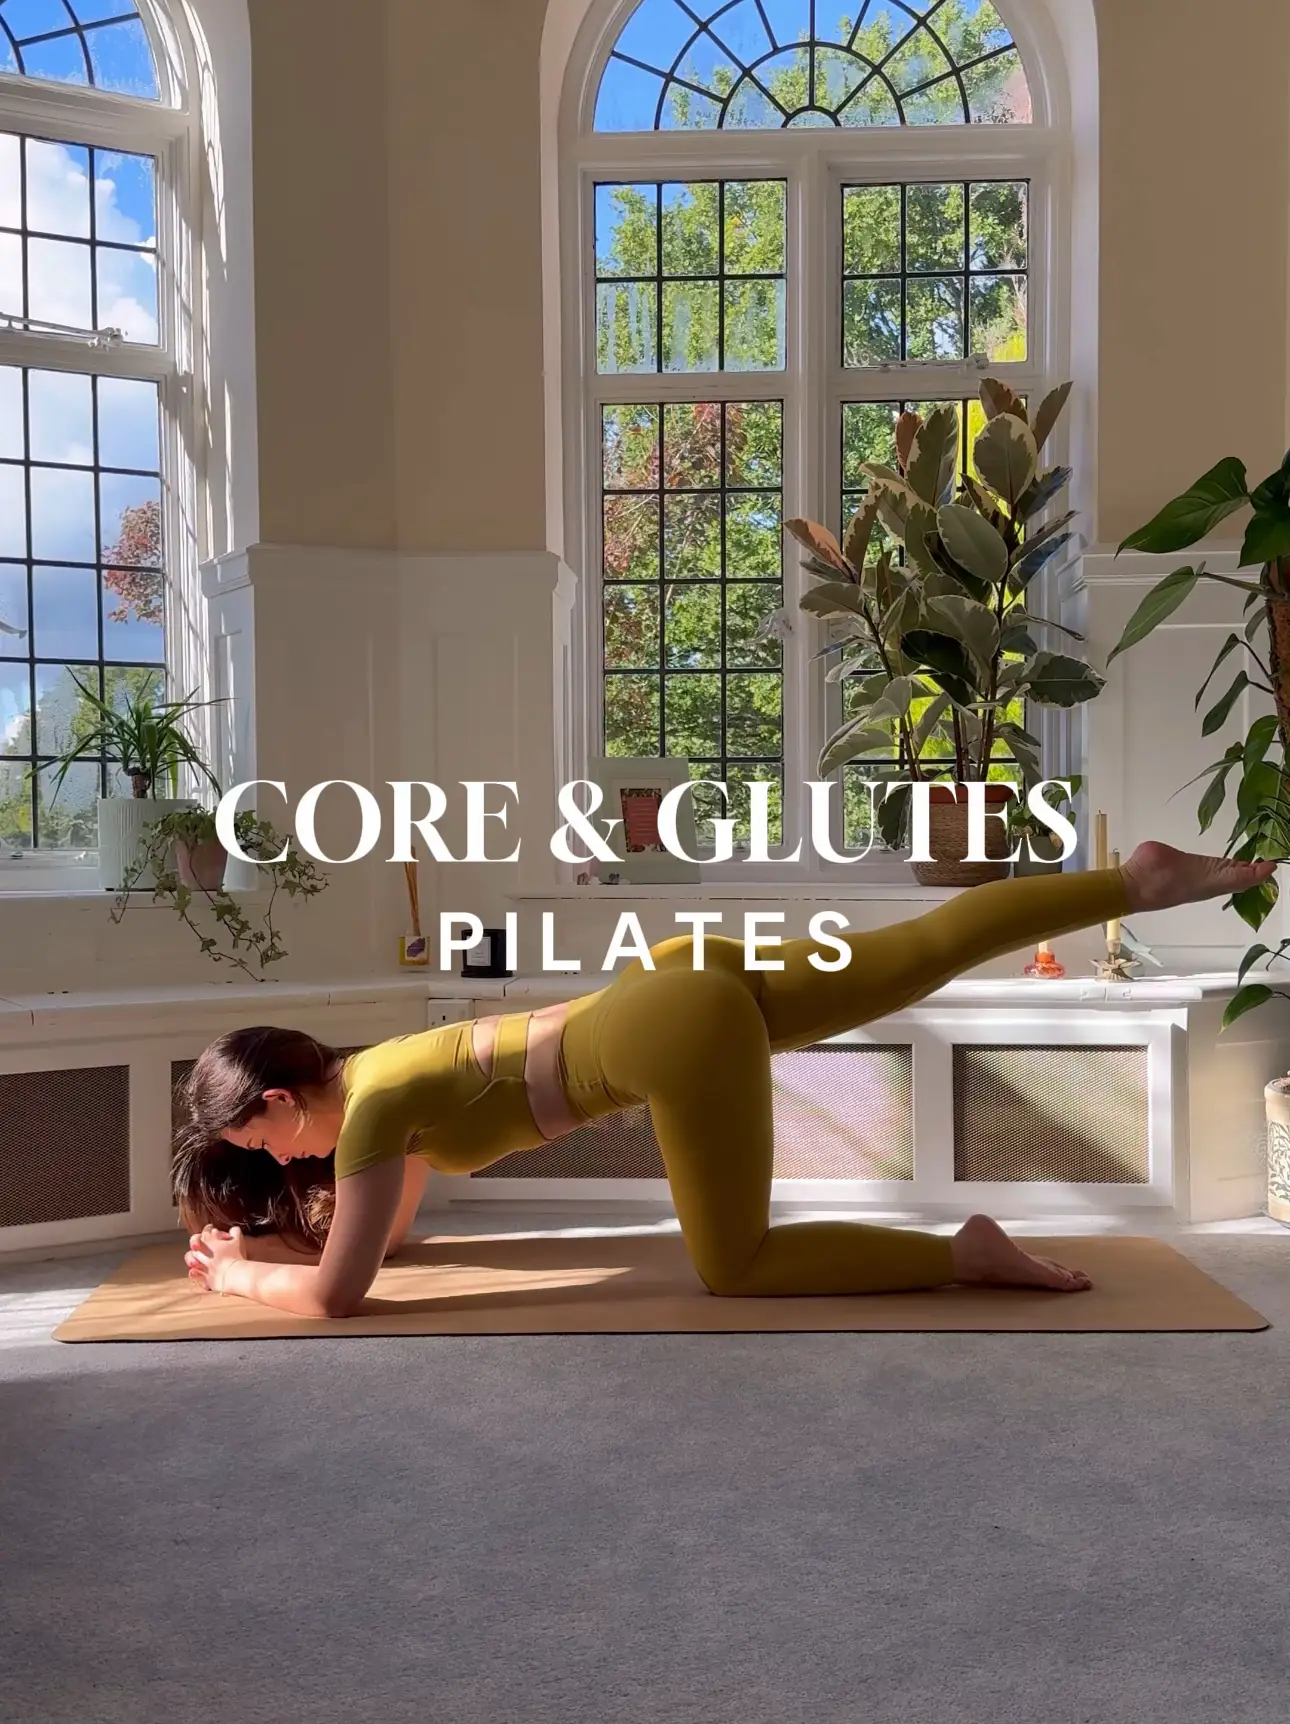 45-Minute Mat Pilates with Robyn, This 45-Minute Mat Pilates class places  emphasis on stretching and the full mat sequence. You'll start with a  warmup, then move into the mat Pilates core